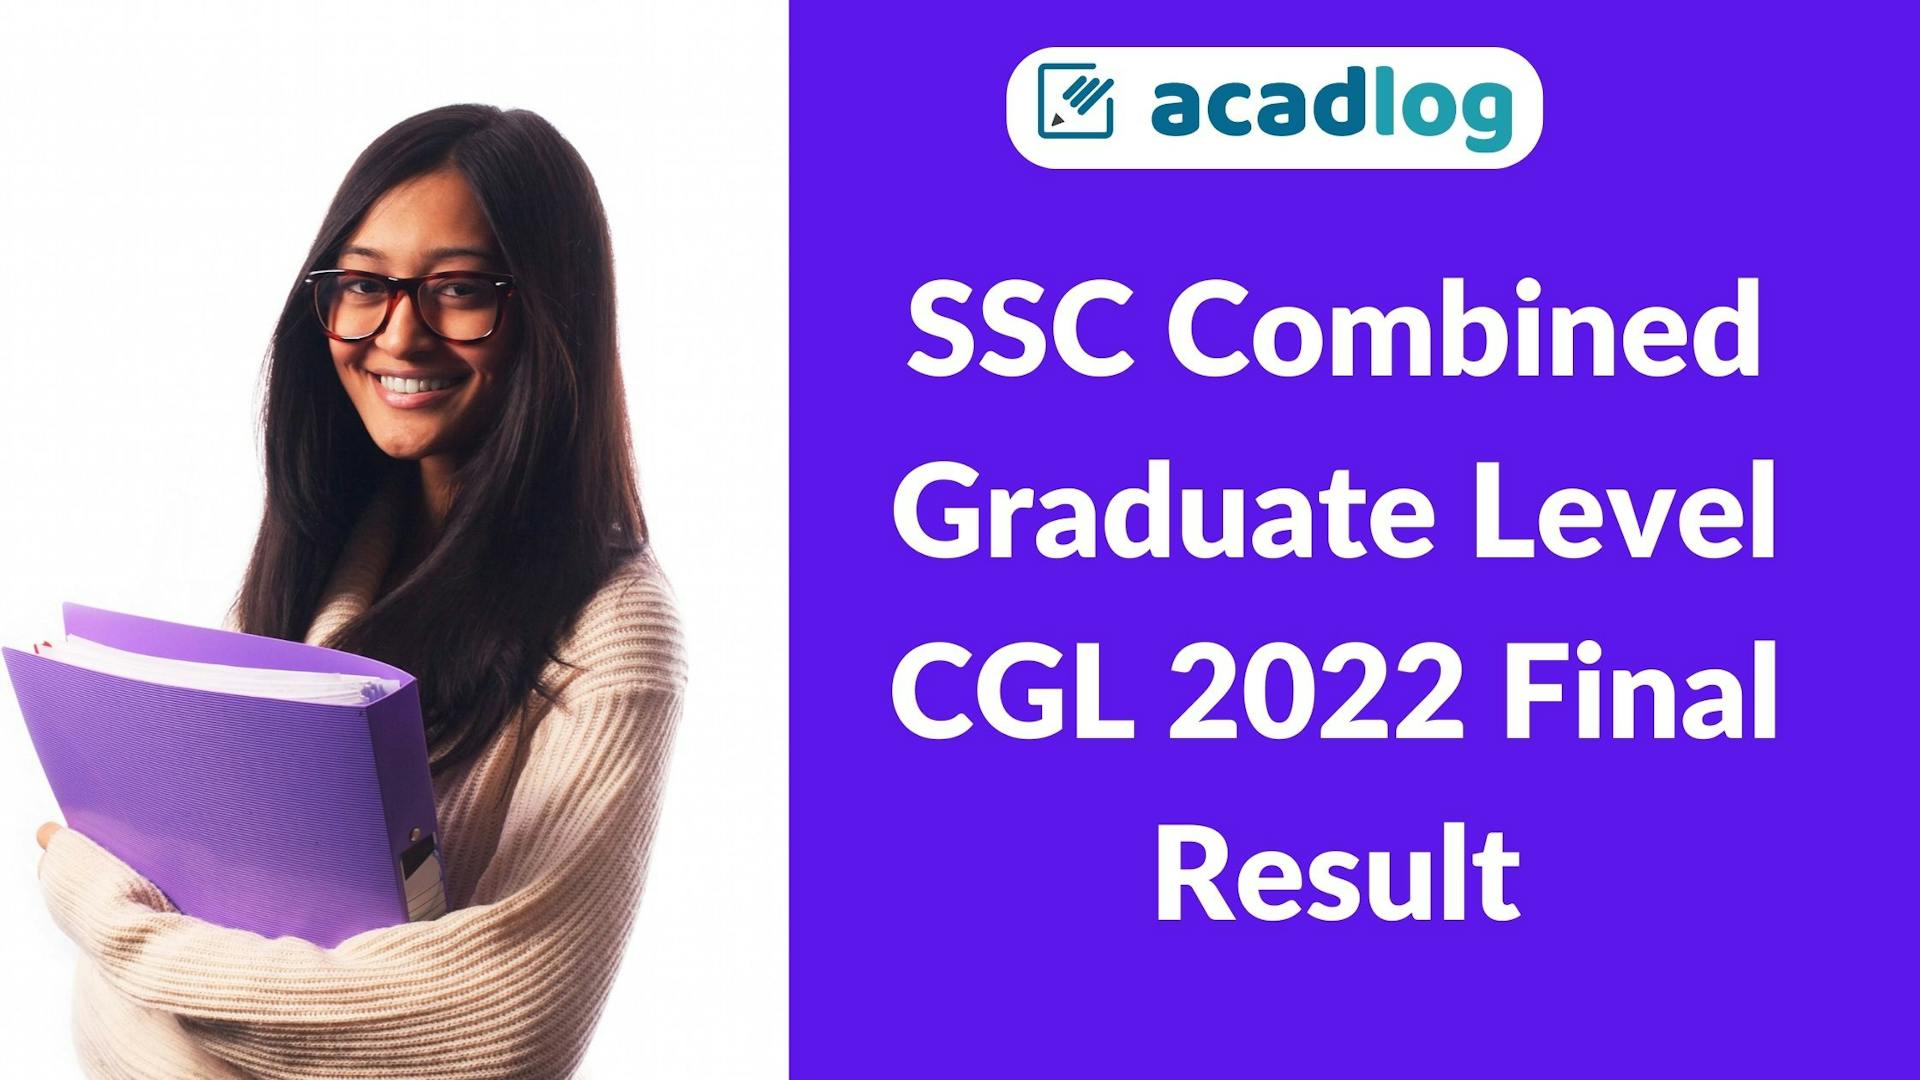 SSC Combined Graduate Level CGL Exam 2022 Final Result